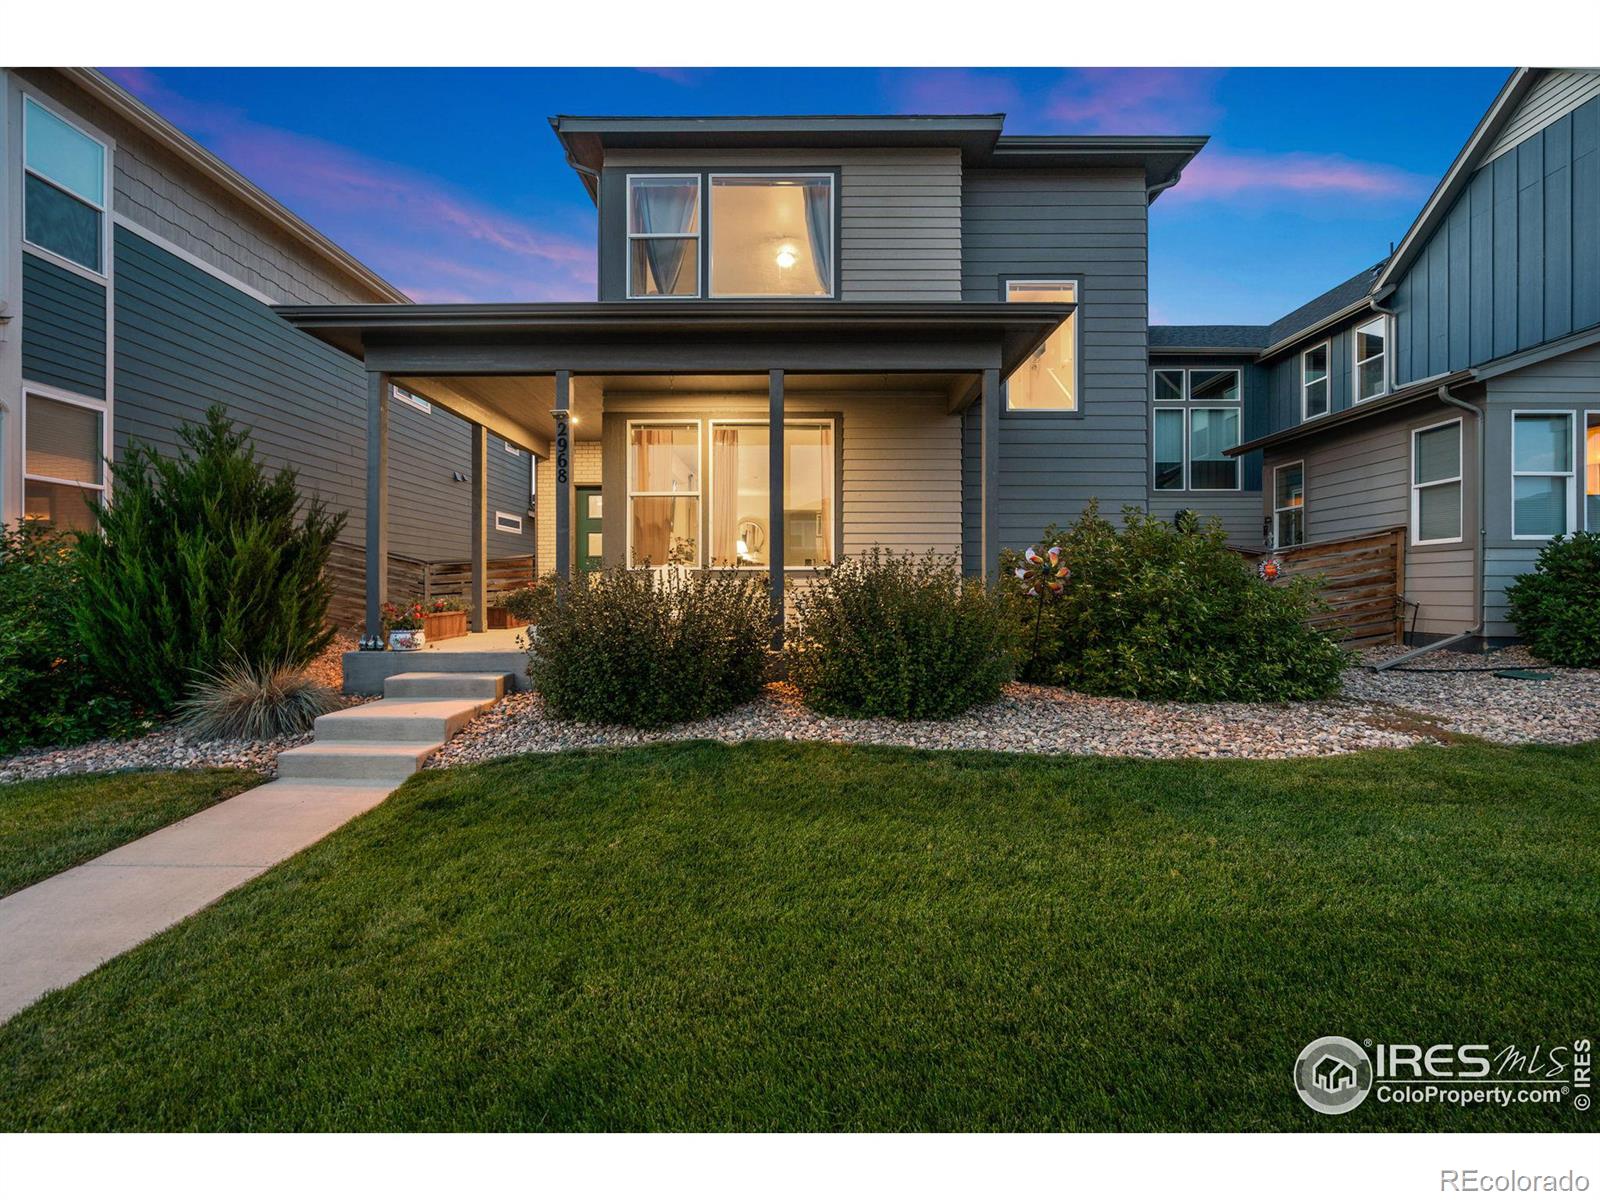 2968  Sykes Drive, fort collins MLS: 456789996260 Beds: 4 Baths: 4 Price: $600,000